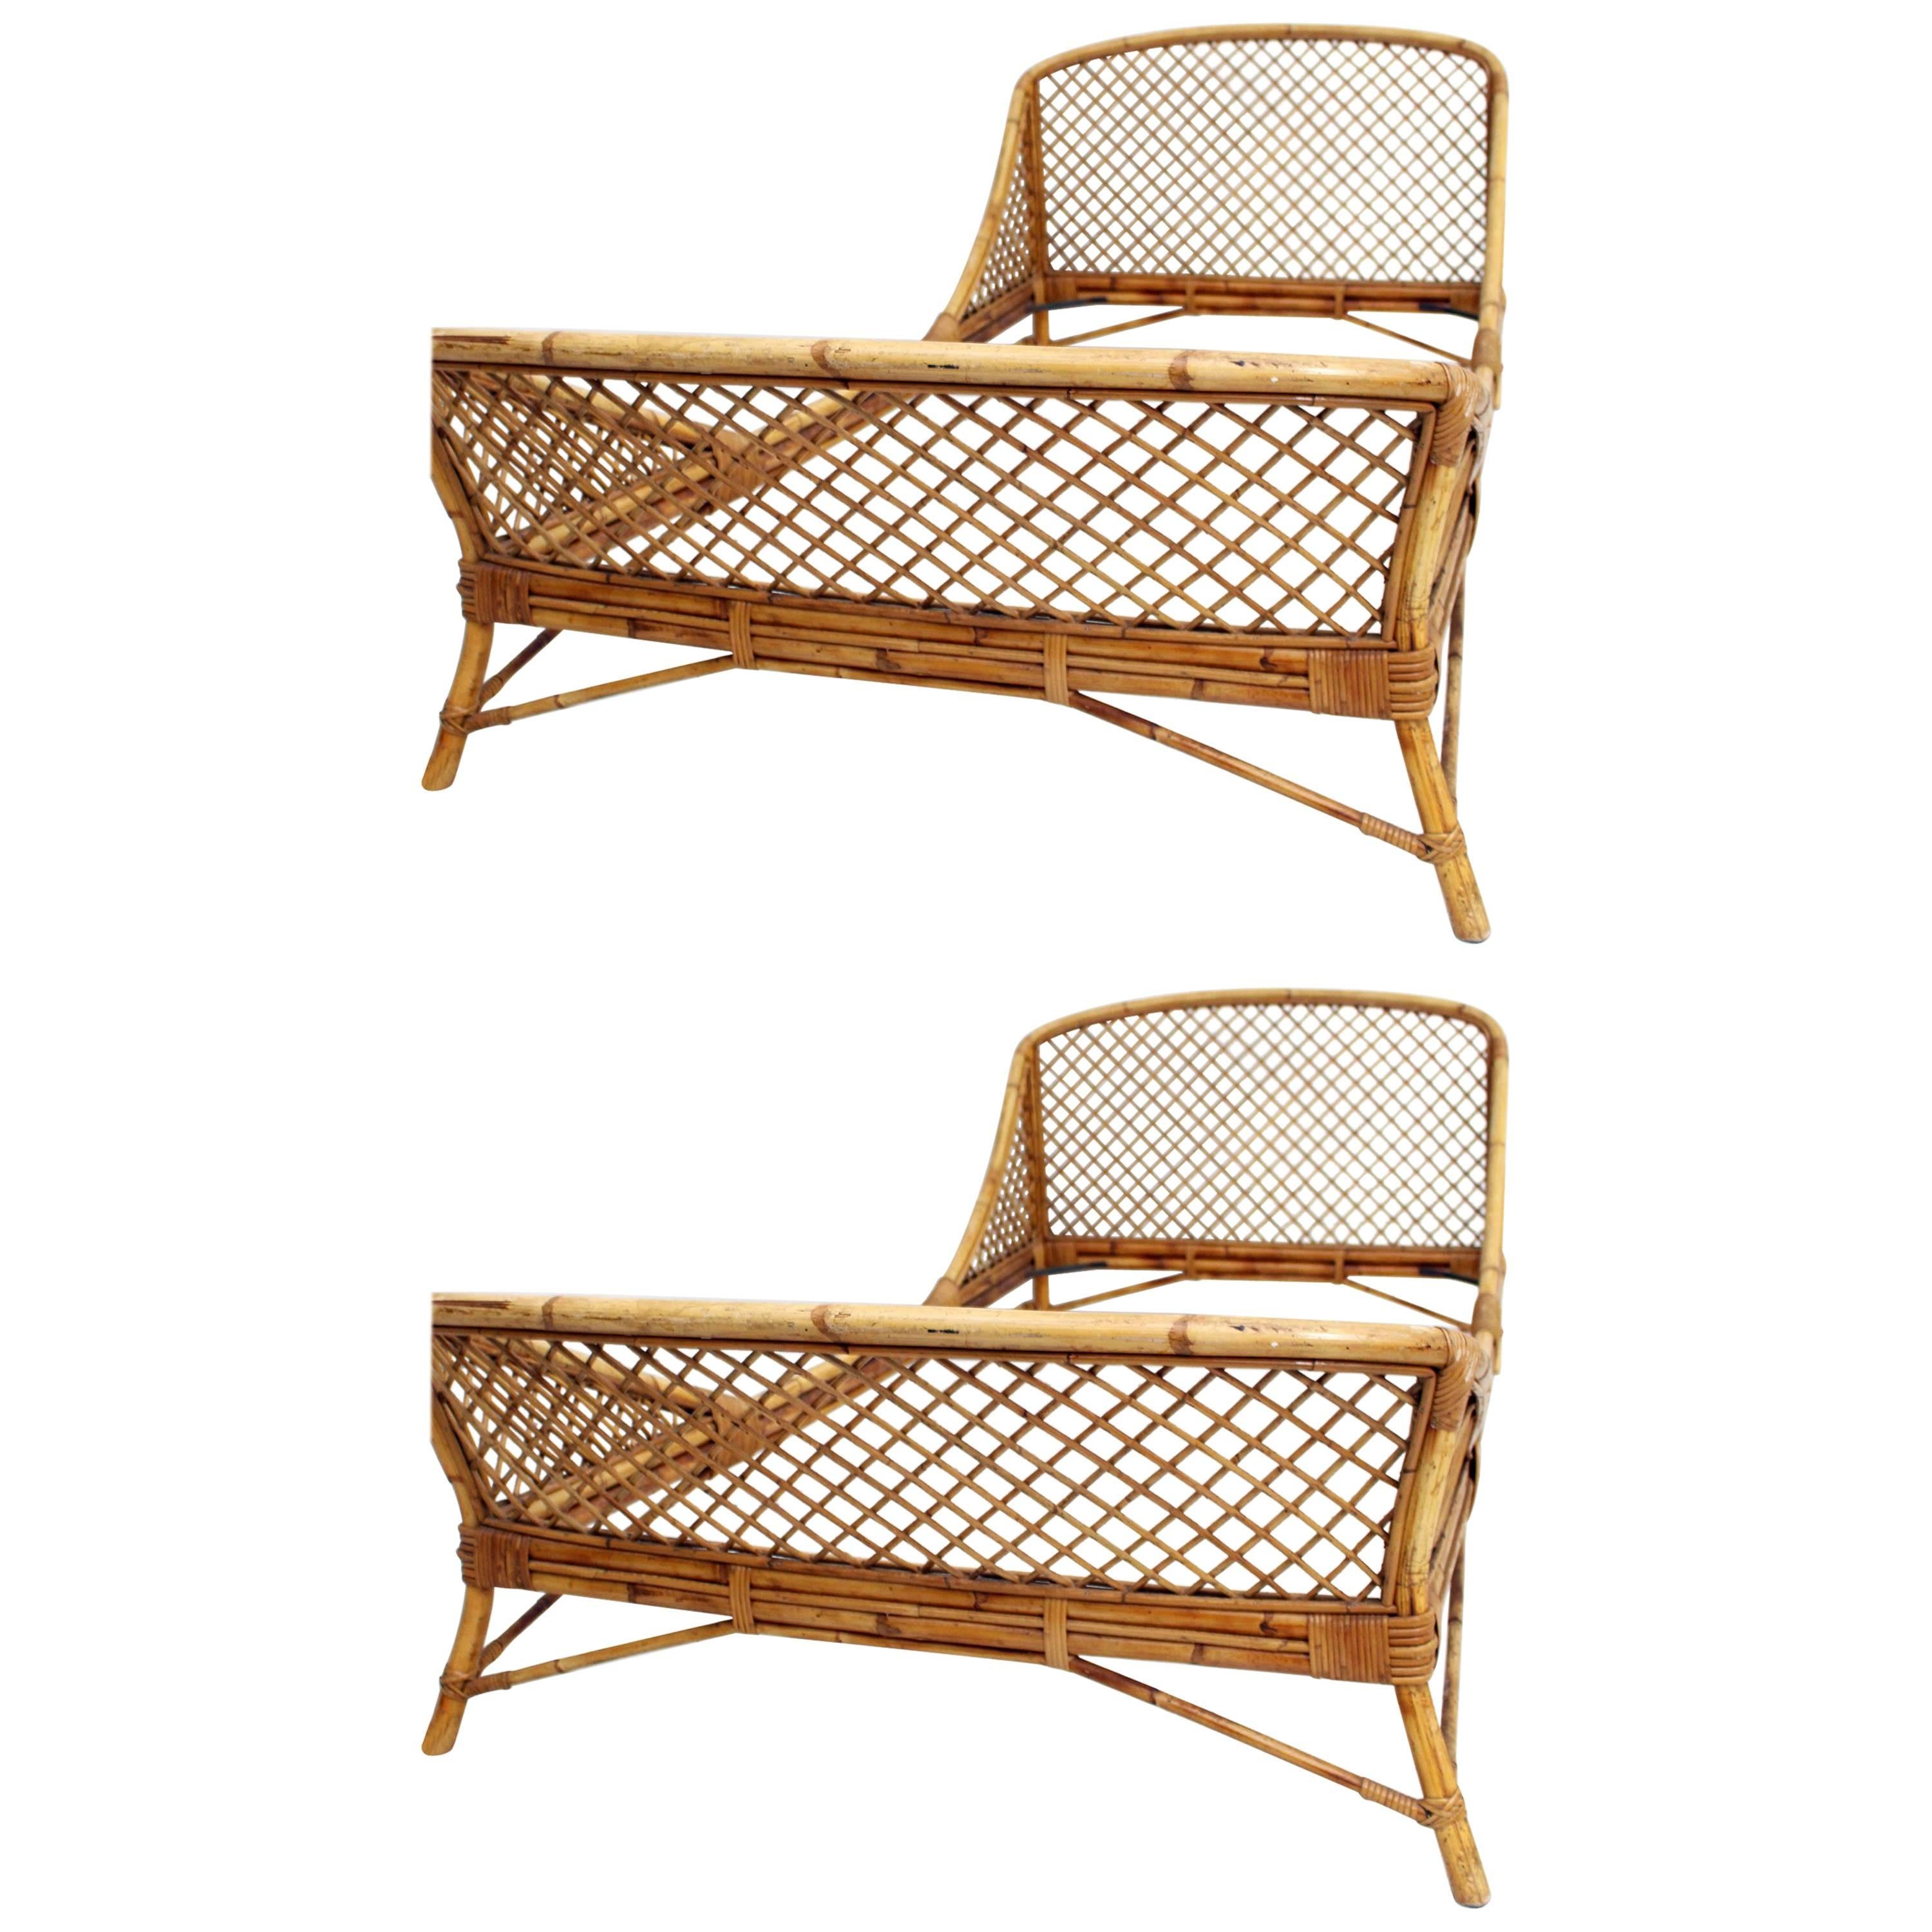 Pair of 1950s Mid-Century Modern Rattan and Bamboo French Beds by Louis Sognot